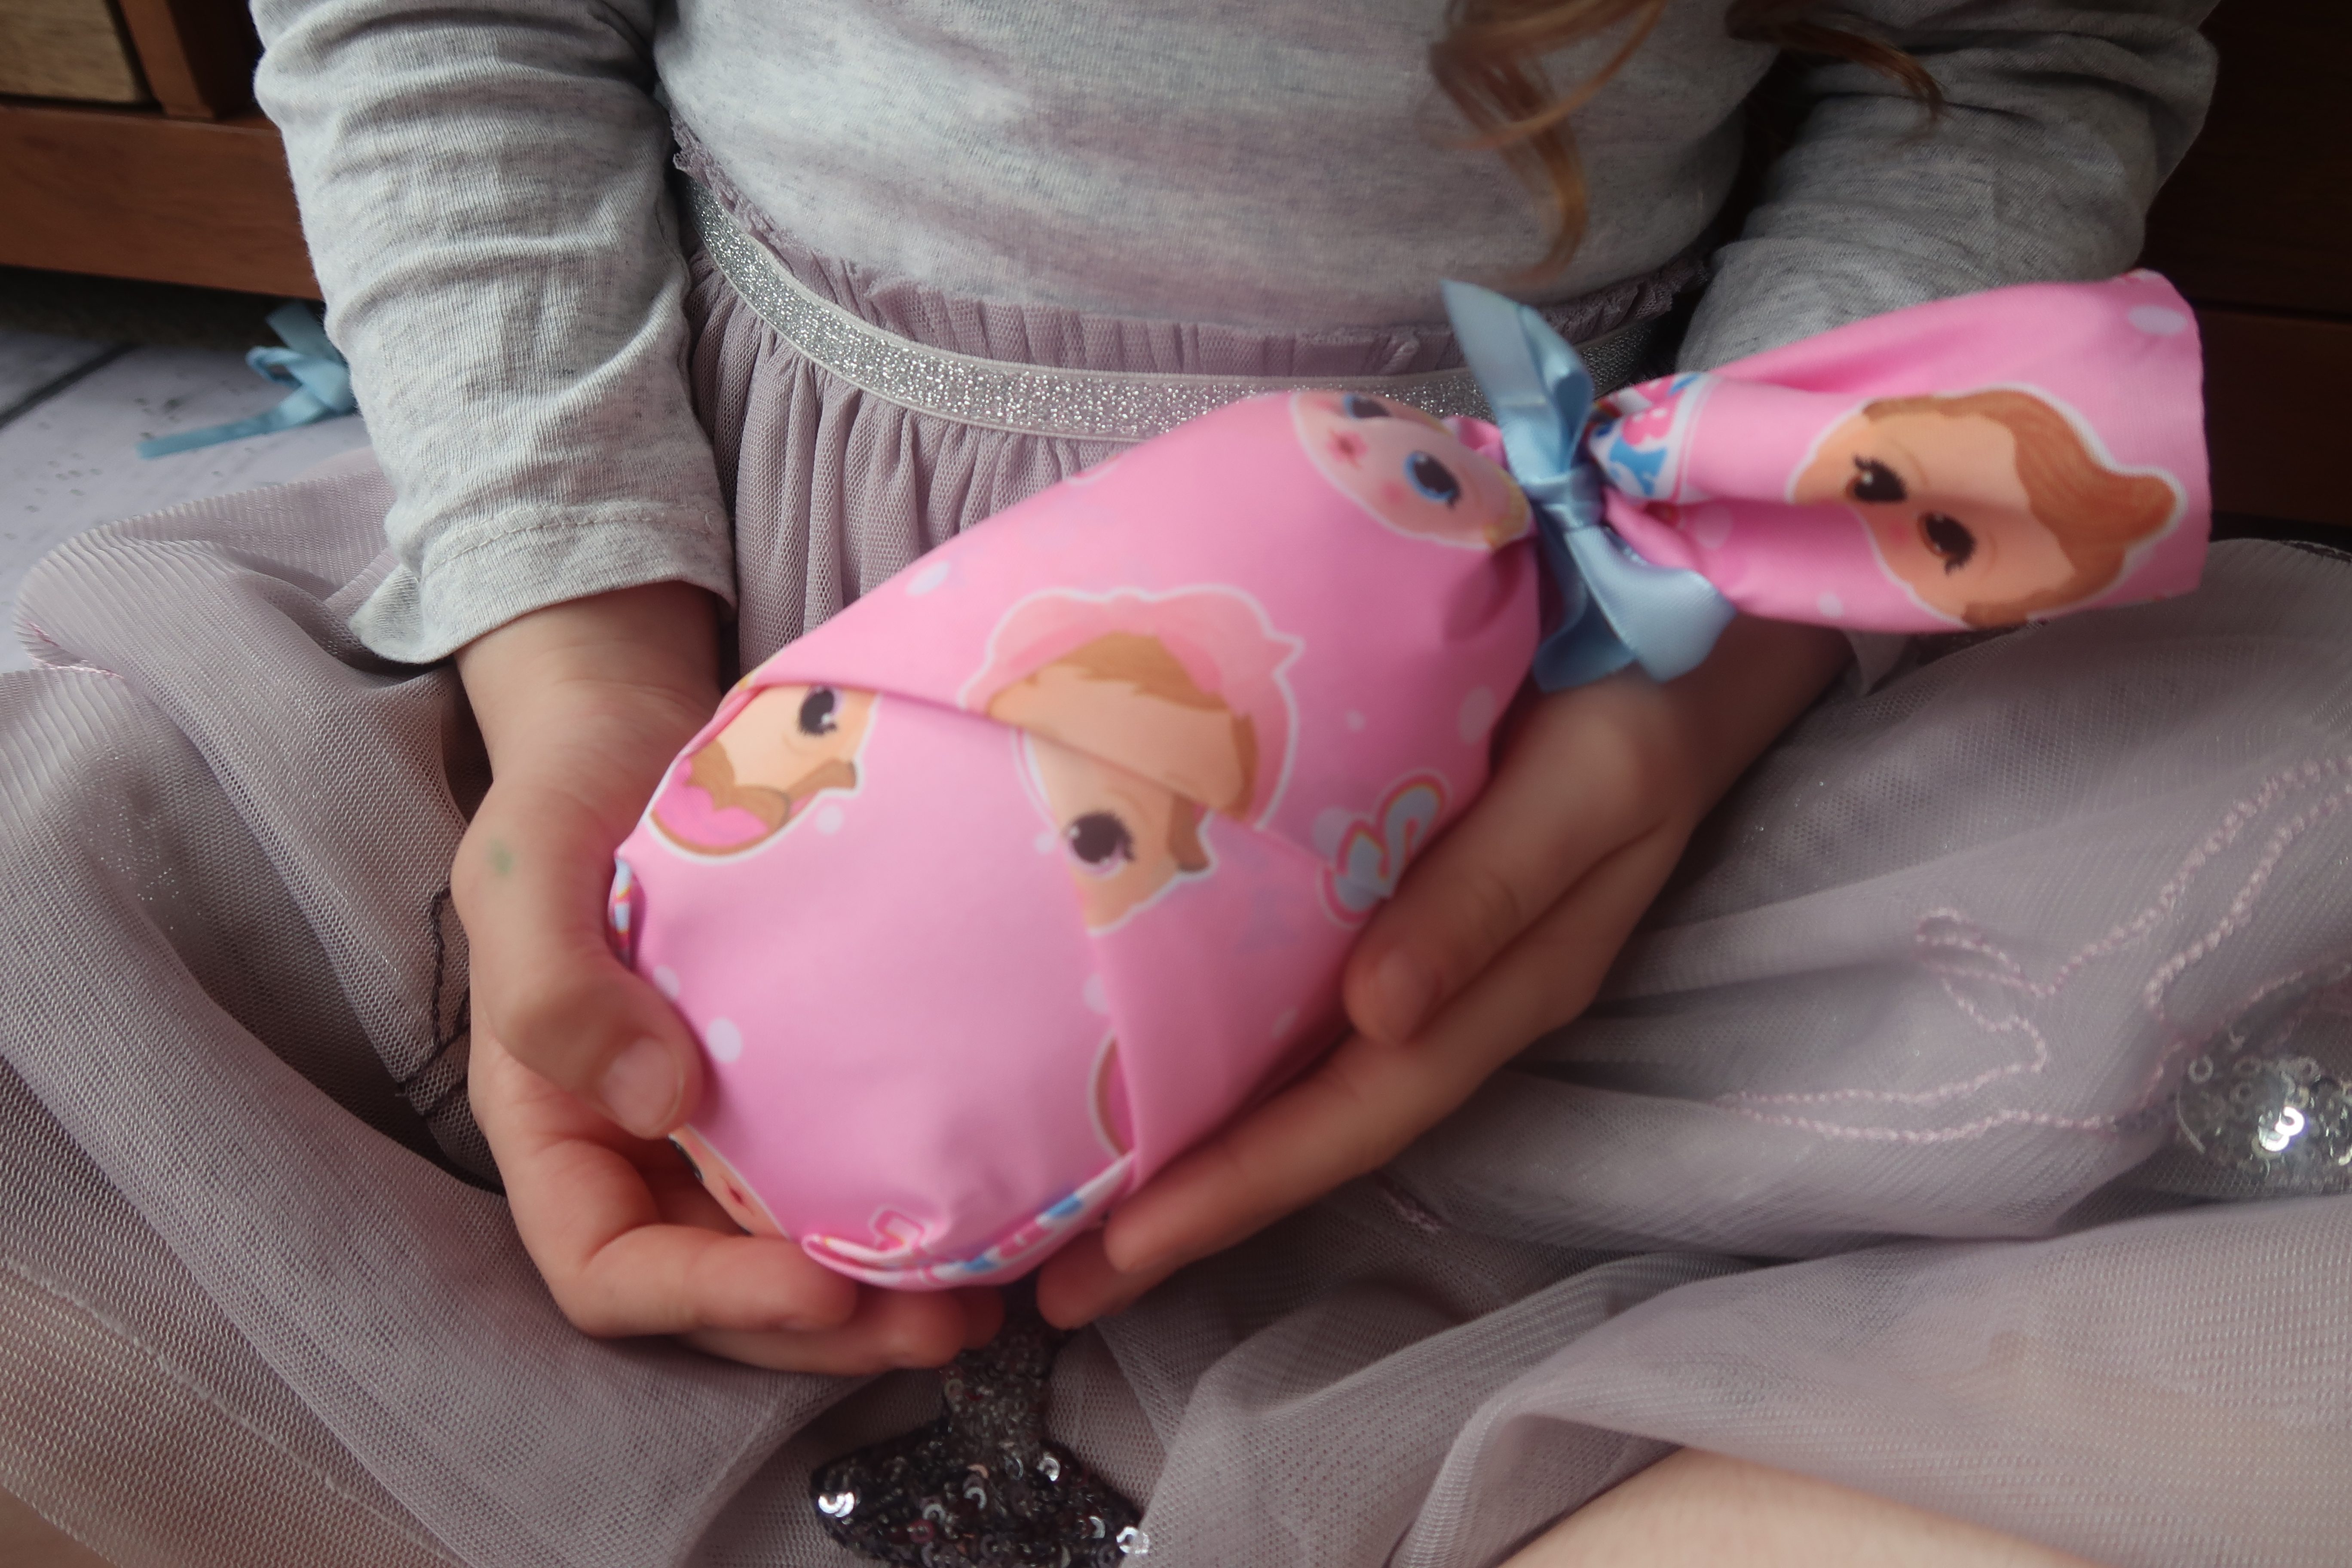 REVIEW & GIVEAWAY – BABY born Surprise Collectible Dolls